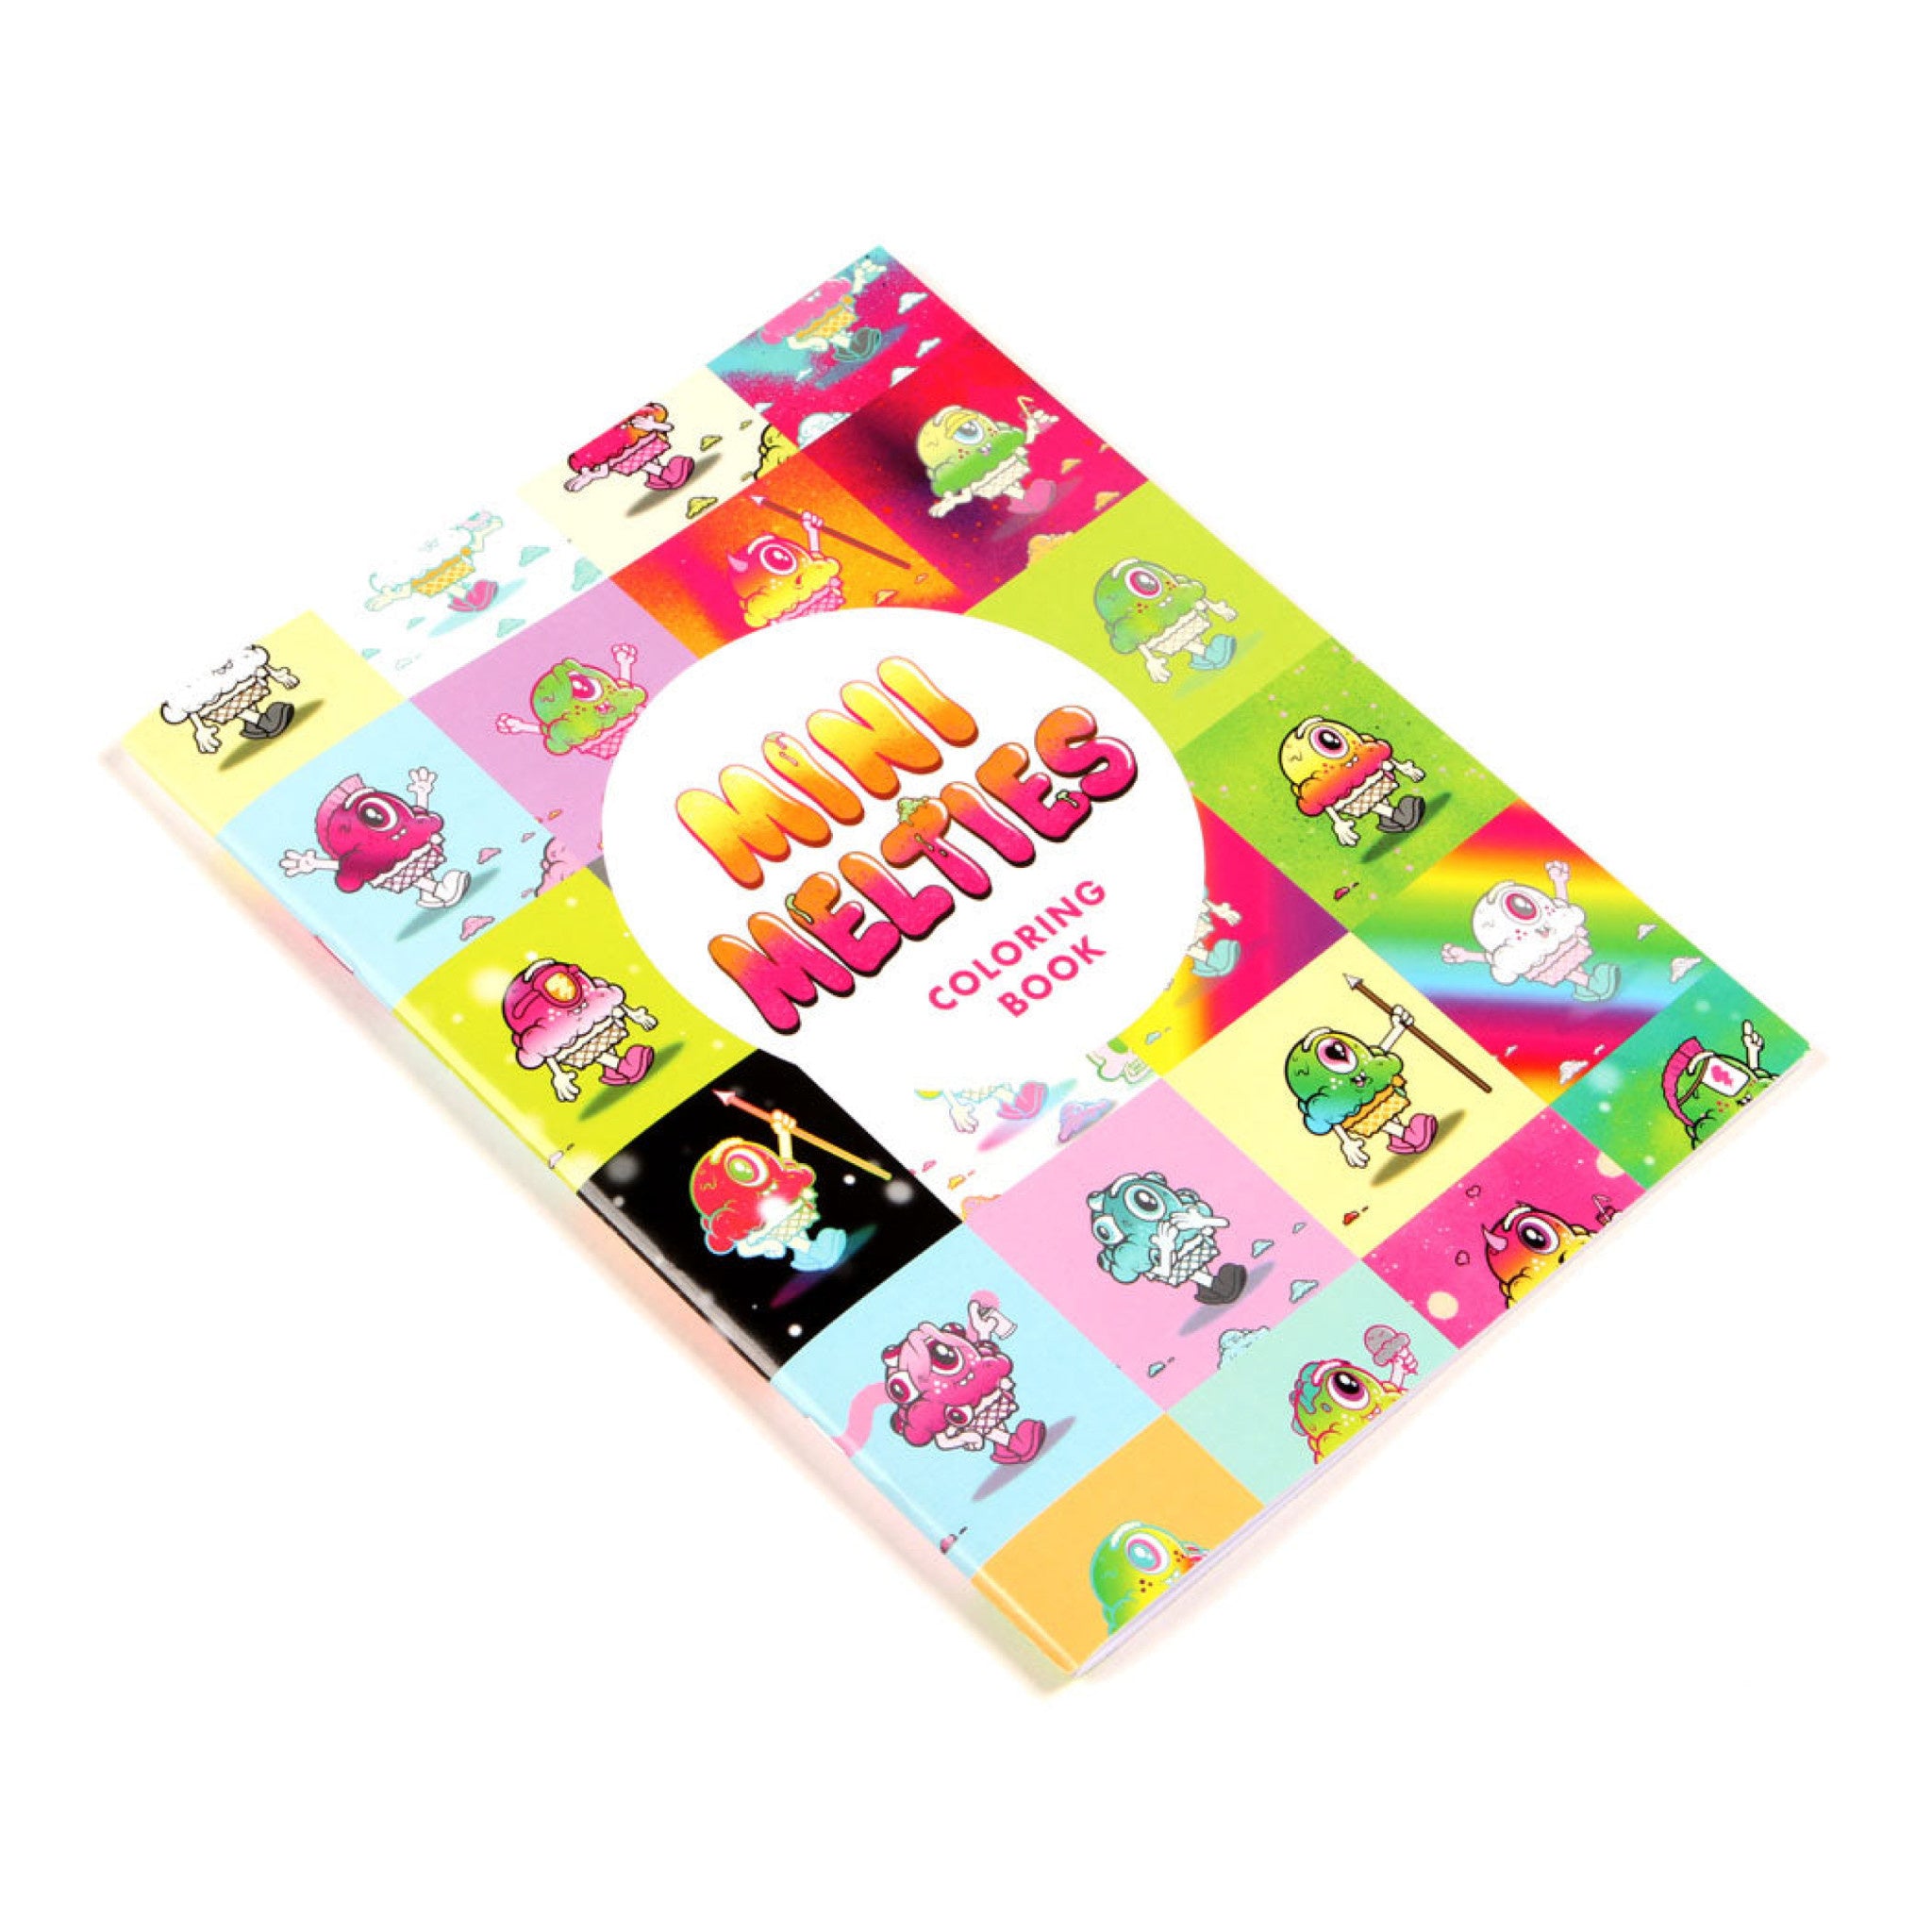 Mini Melties Coloring Book by Buff Monster - Wynwood Walls Shop